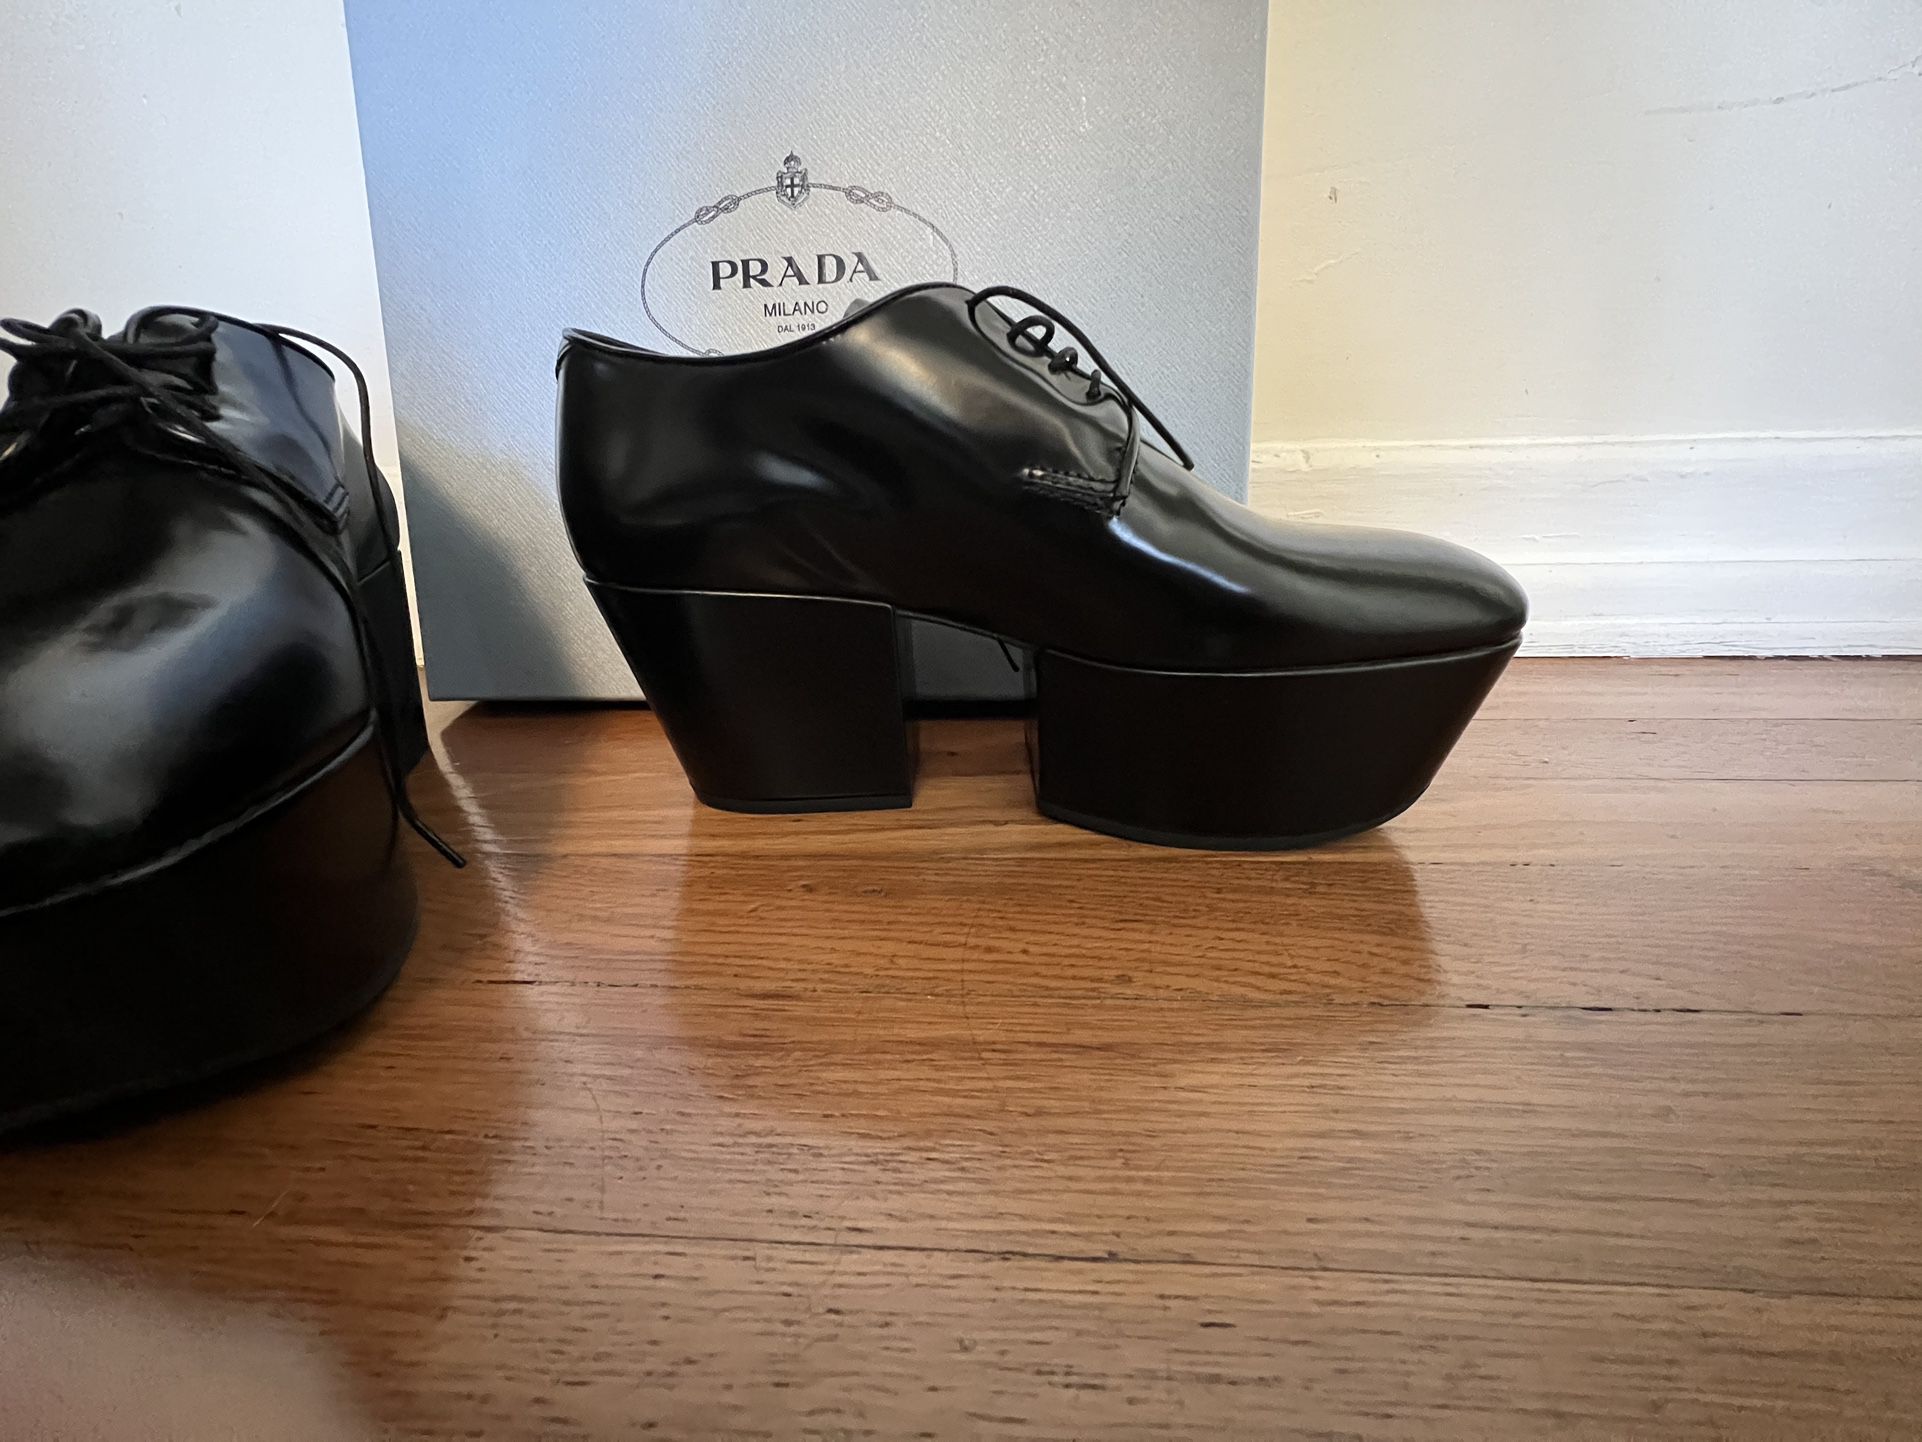 Chanel 2016 Platform Clogs for Sale in Corona, CA - OfferUp